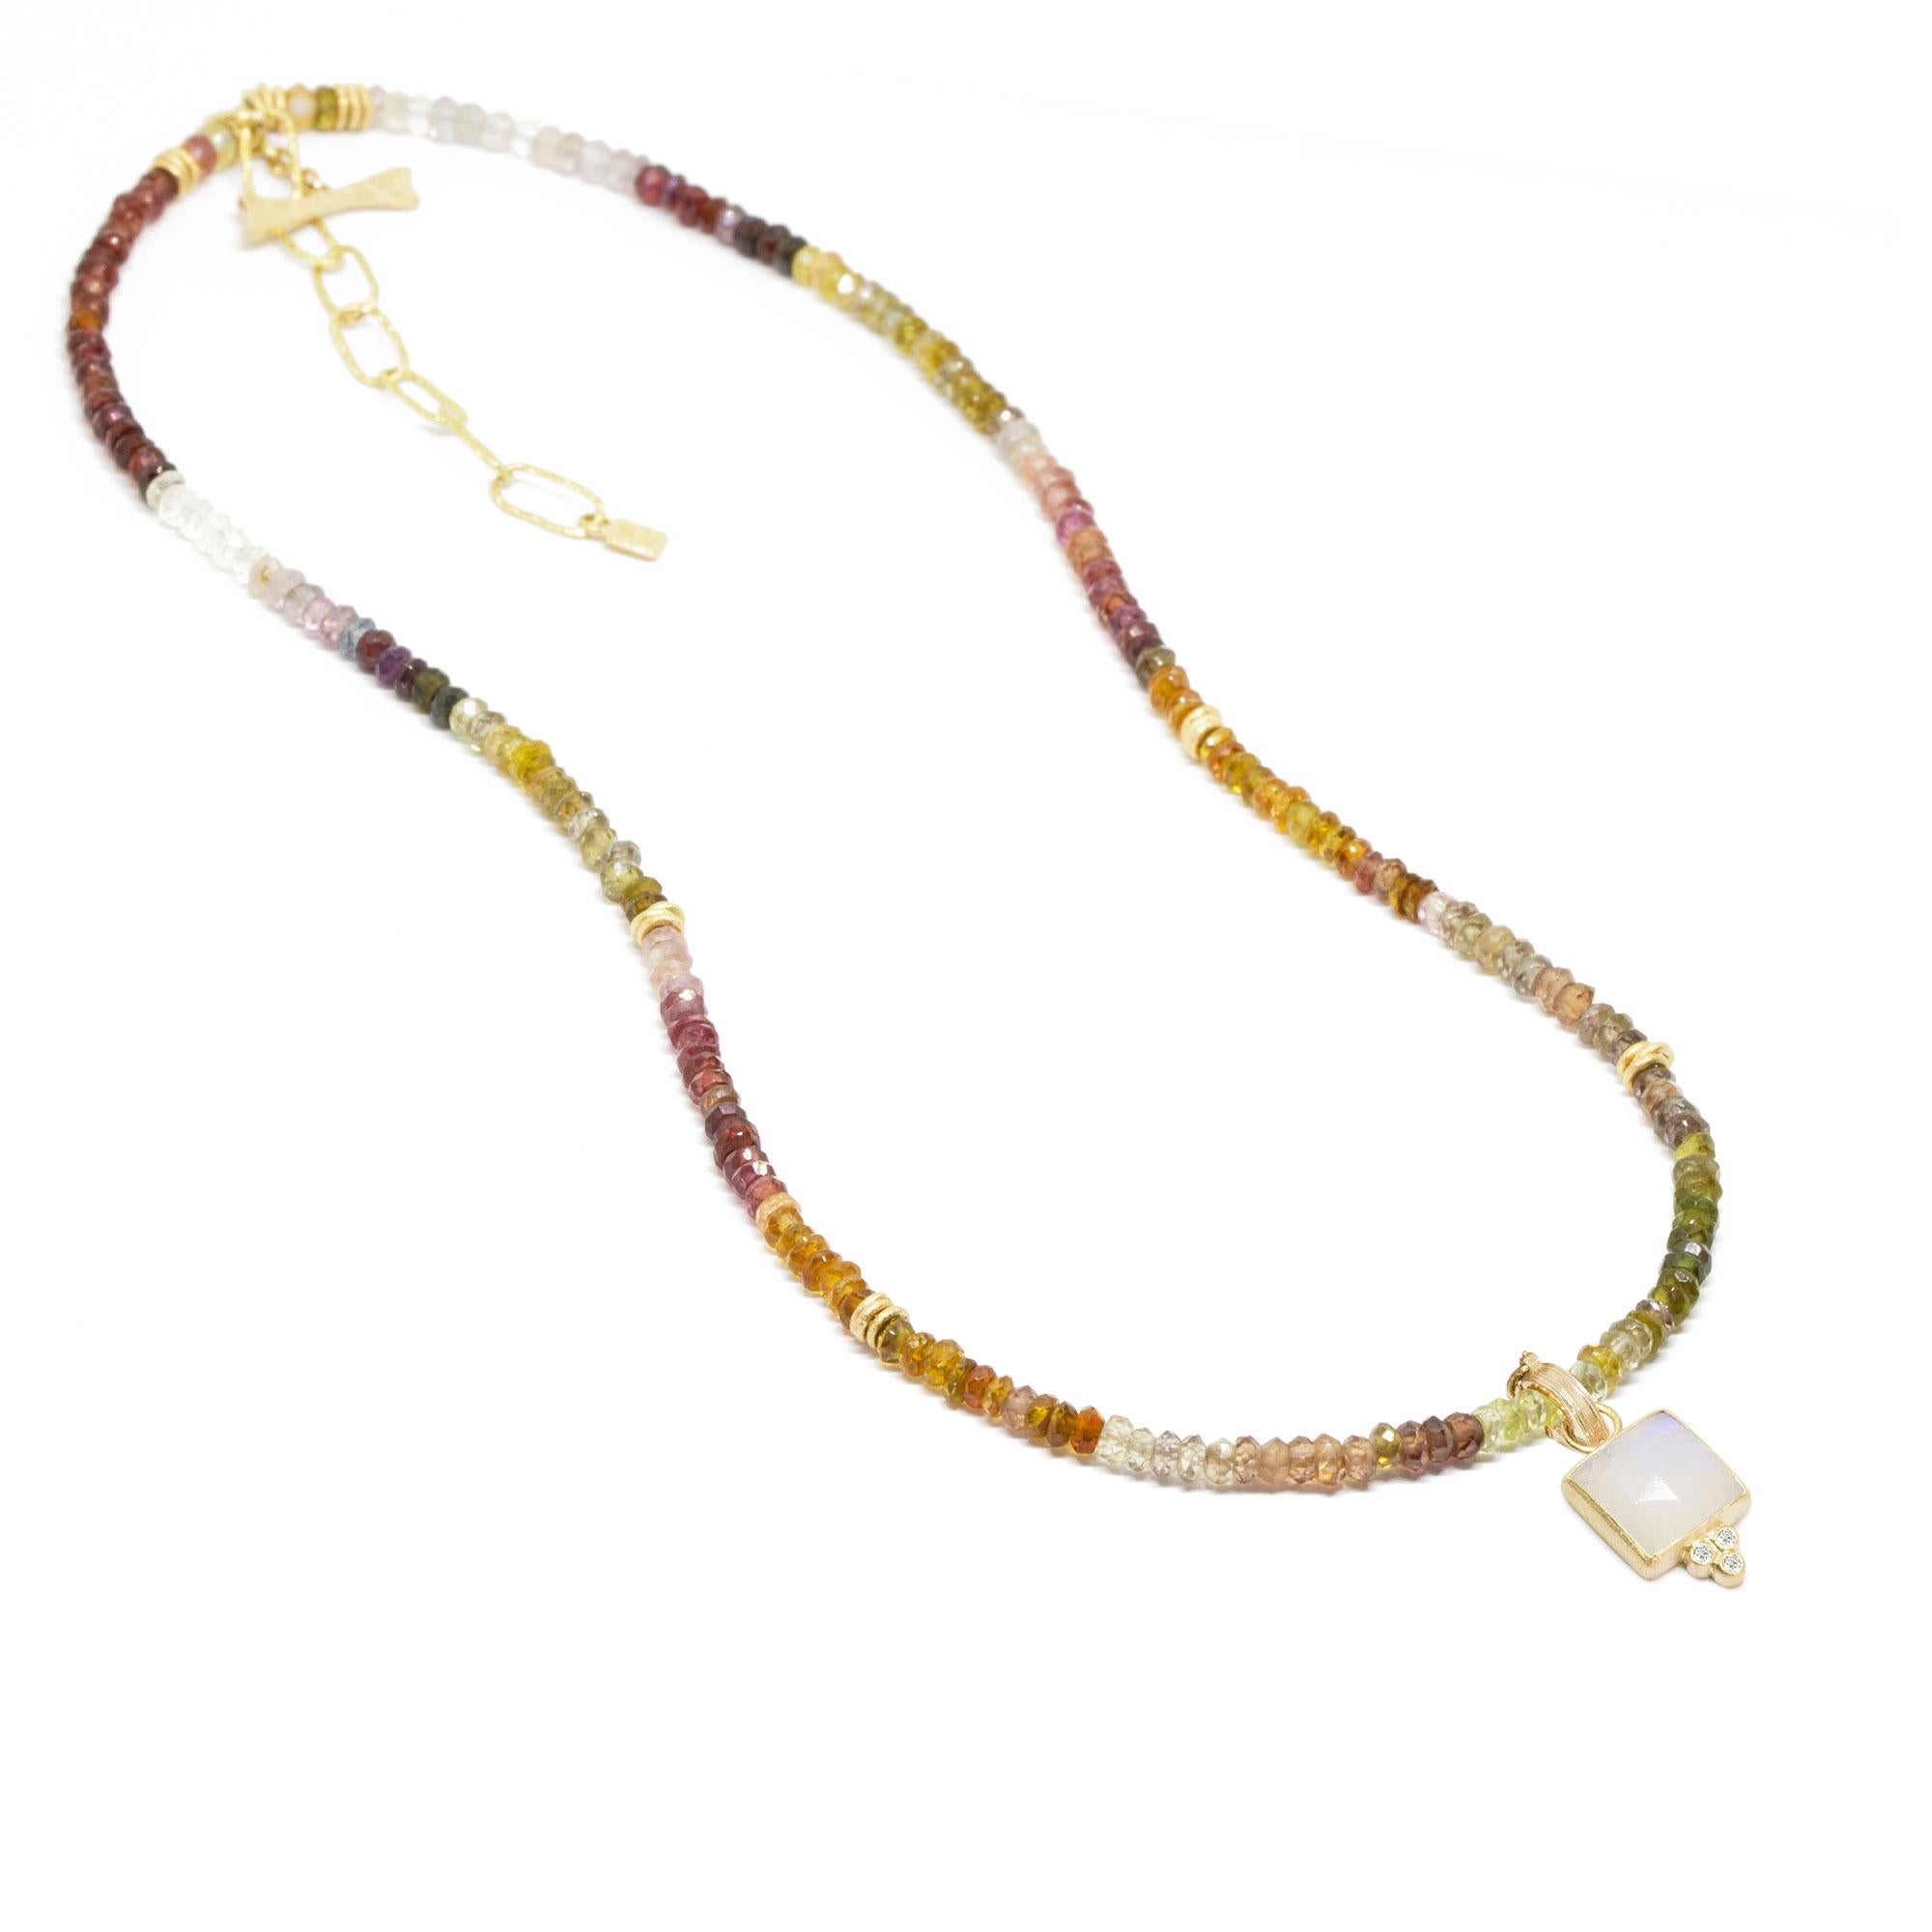 The best part about the Short Heritage Gold Necklette isn’t just that it can be worn long, doubled-up, or as a wrap bracelet (although that’s pretty cool). It’s that you can thread any of our Charms onto the natural zircon beads—have fun playing